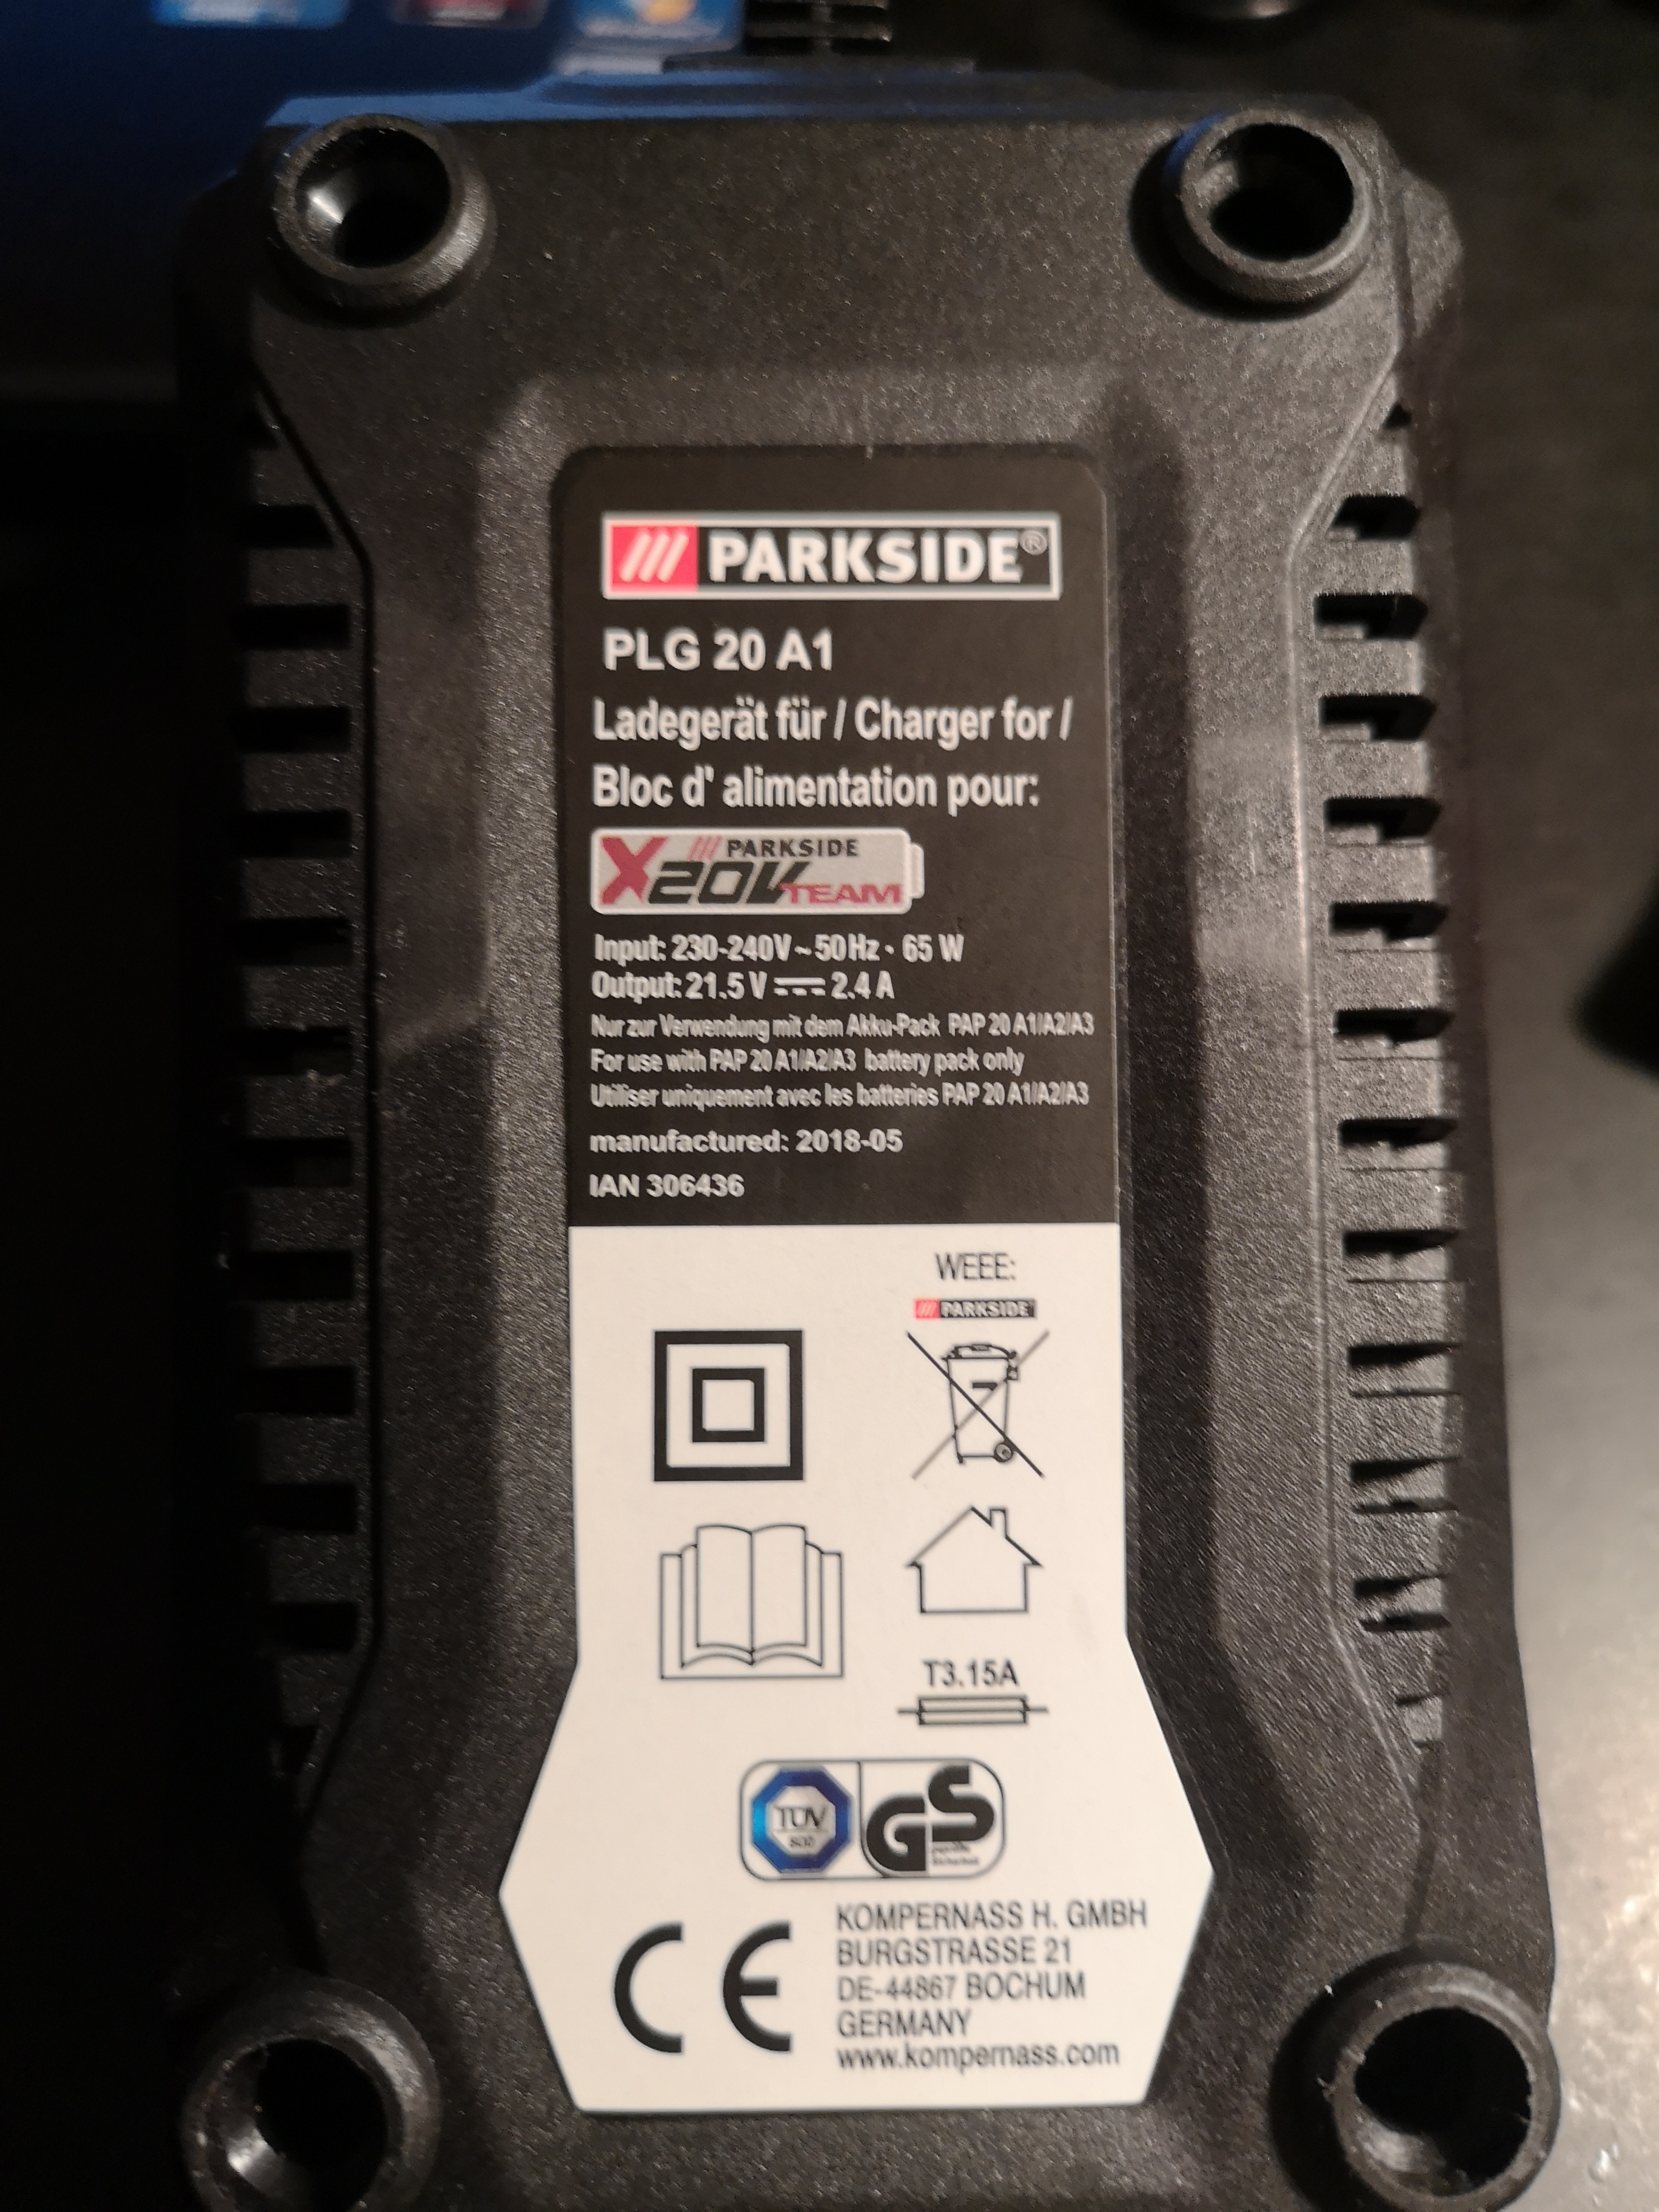 Modifying Parkside PLG 20 A1 Charger for Continuous Operation with  Converted Batteries | Akkus & Ladegeräte